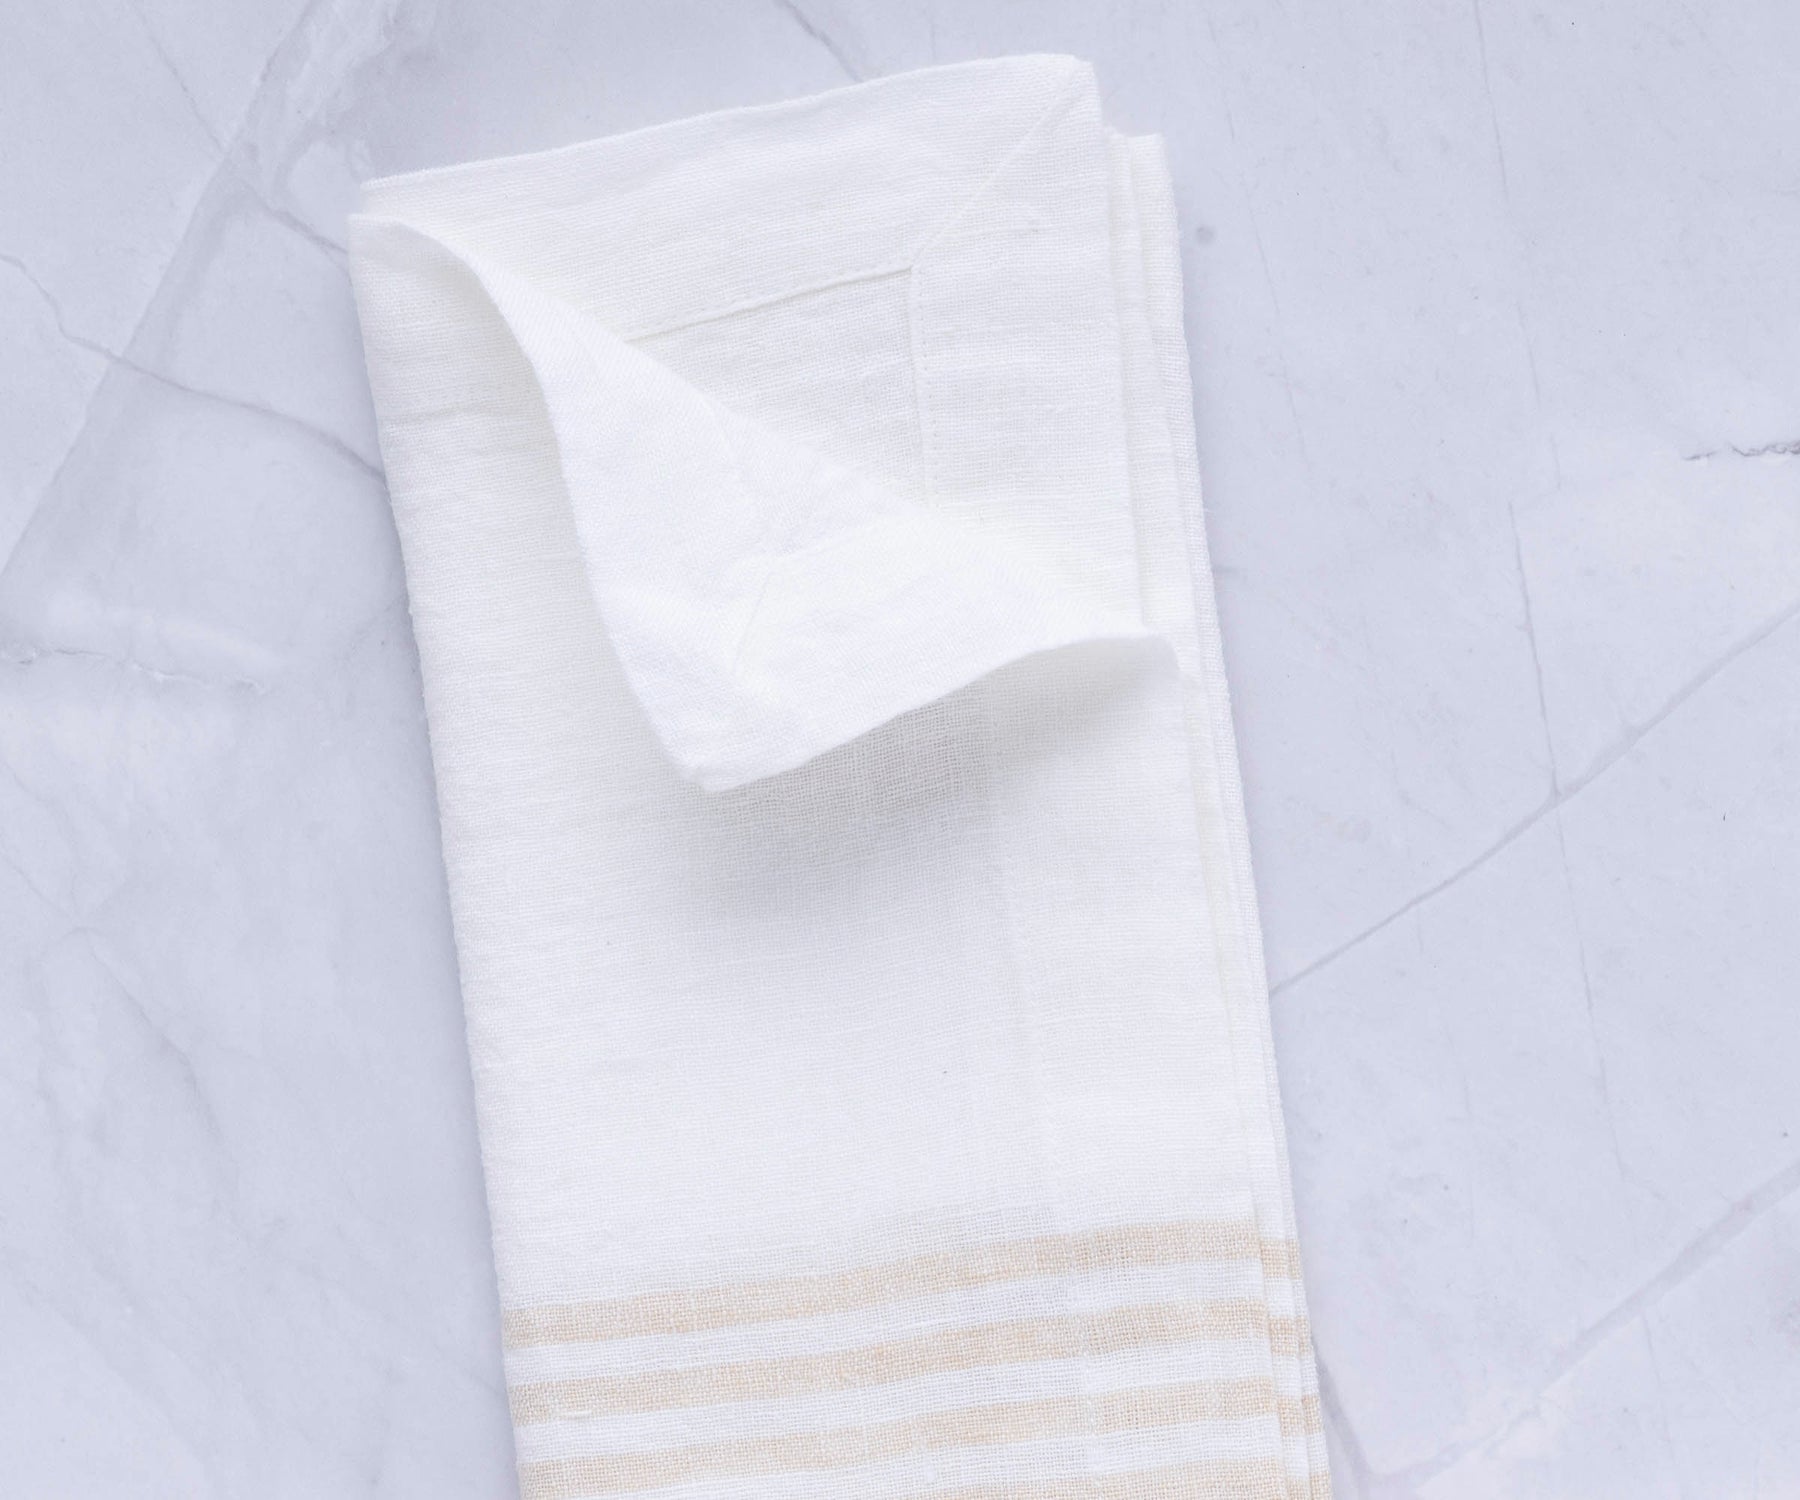 A single linen dinner napkin with a striped pattern